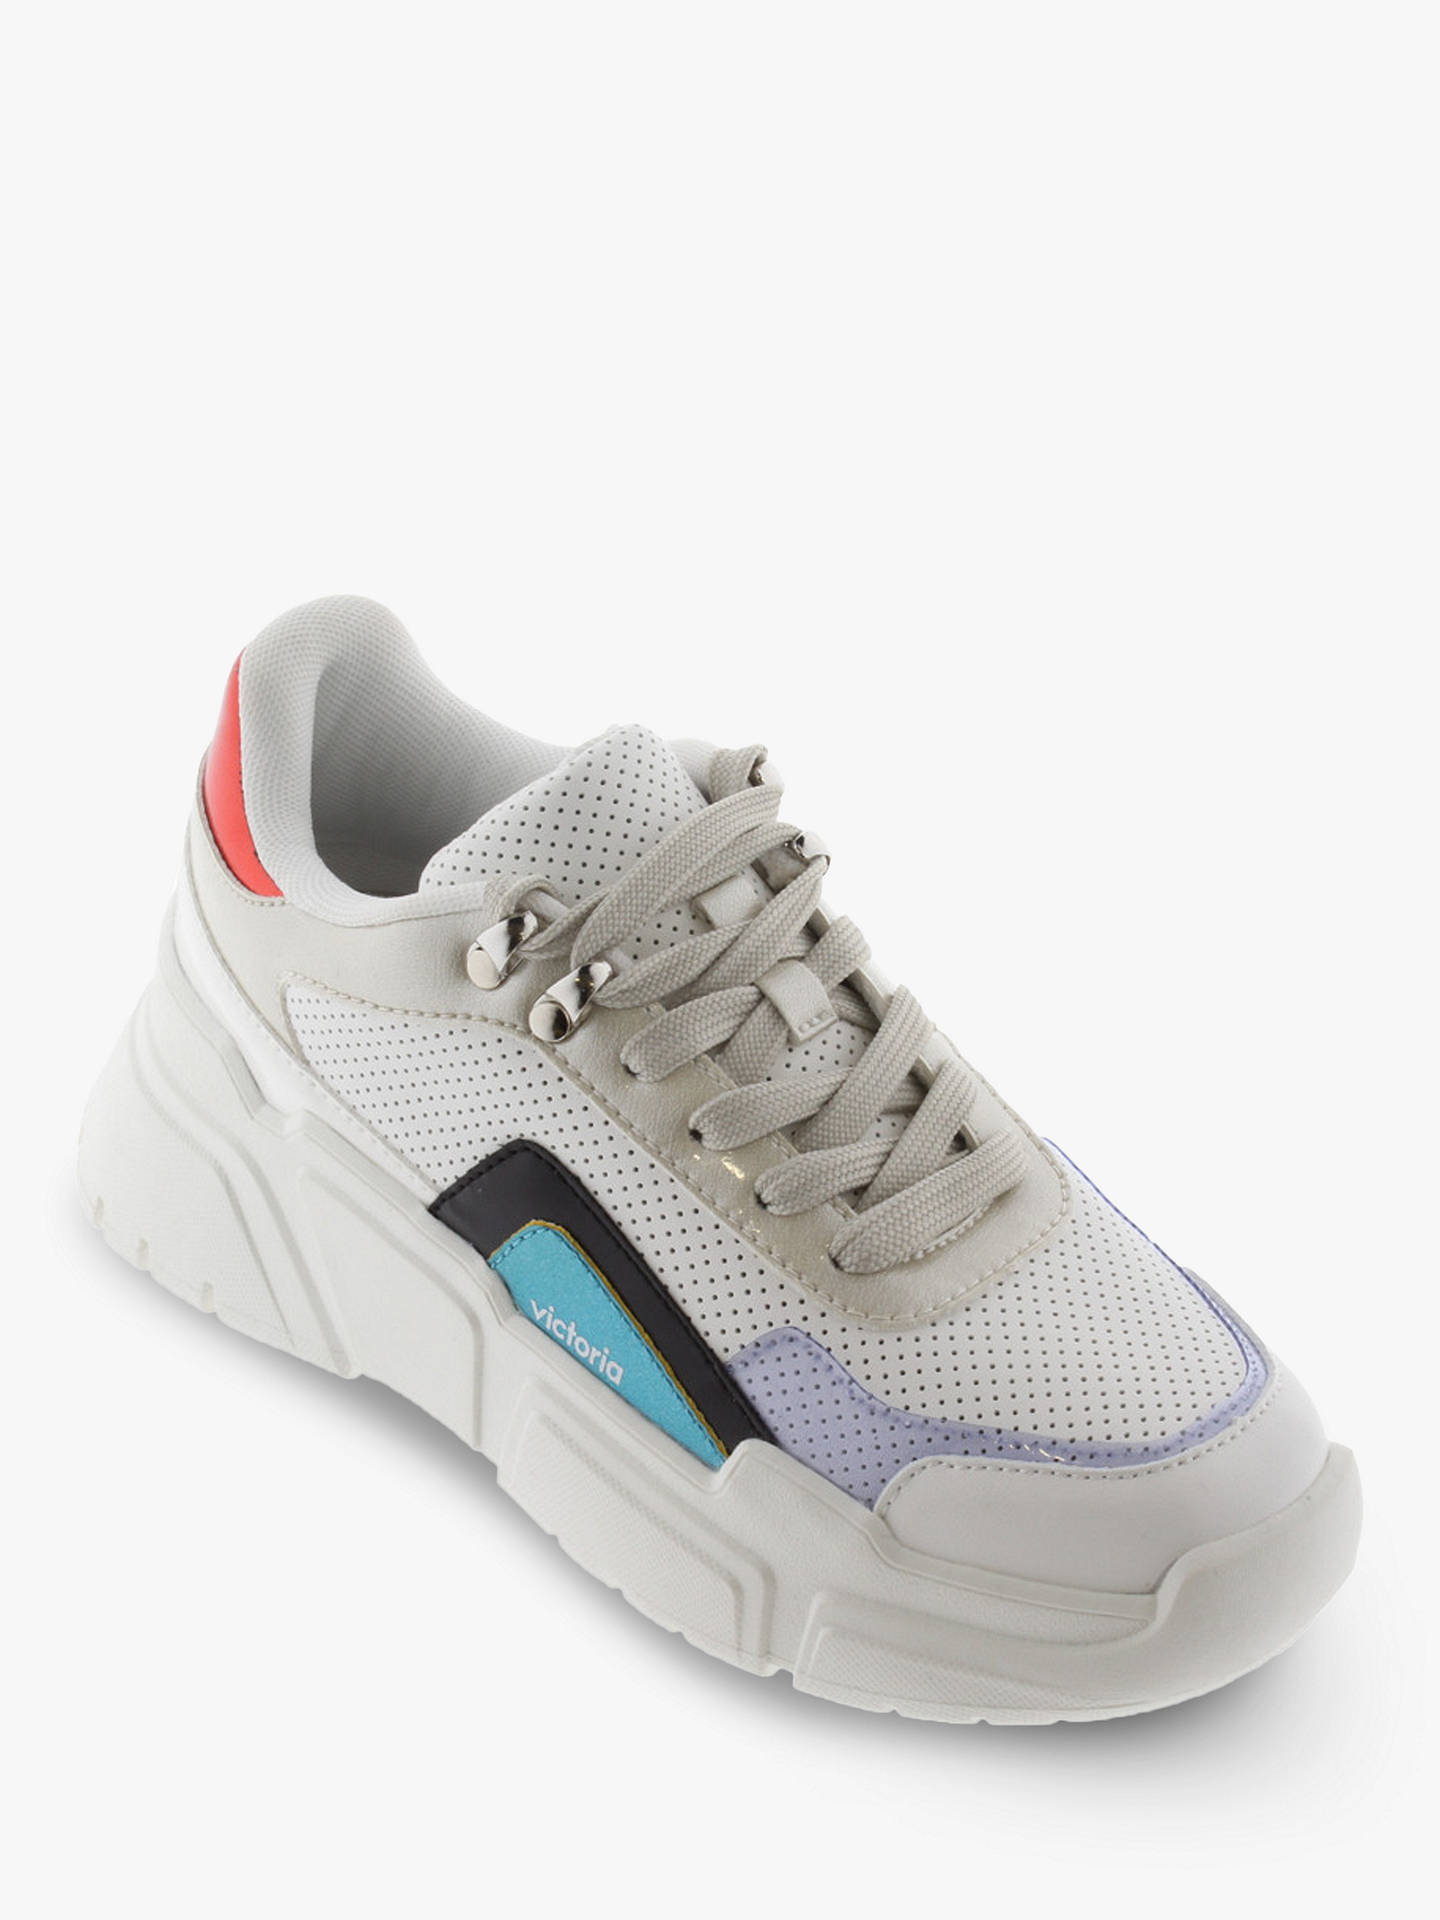 Victoria Shoes Totem Chunky Trainers, White at John Lewis & Partners